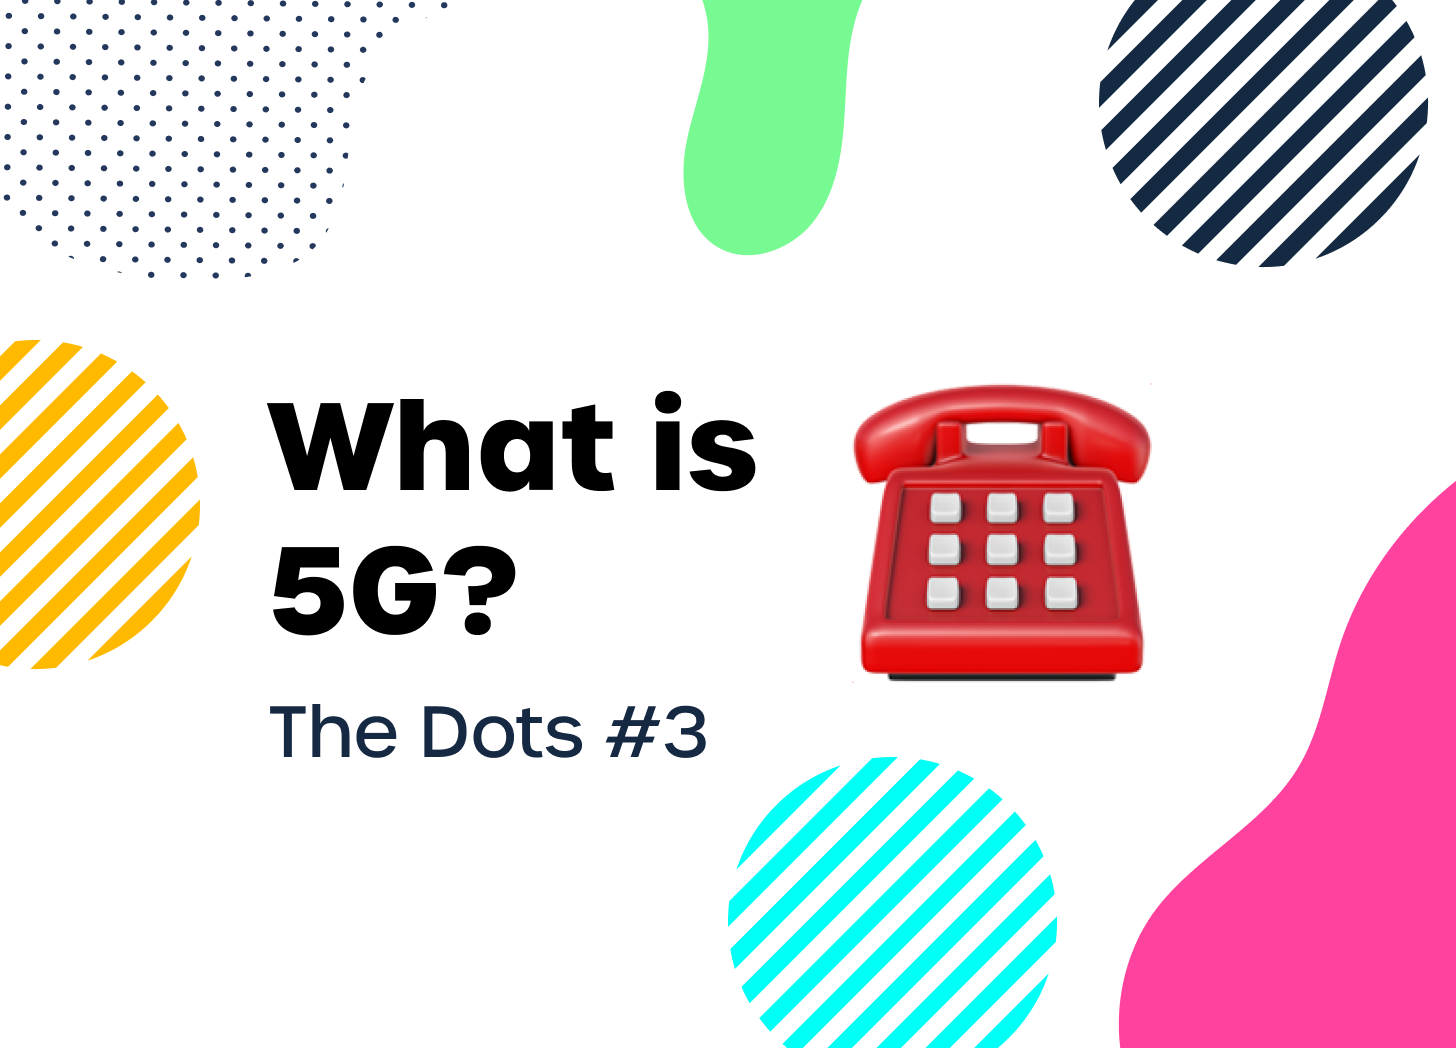 the words "what is 5g" with a bunch of nice shapes around it